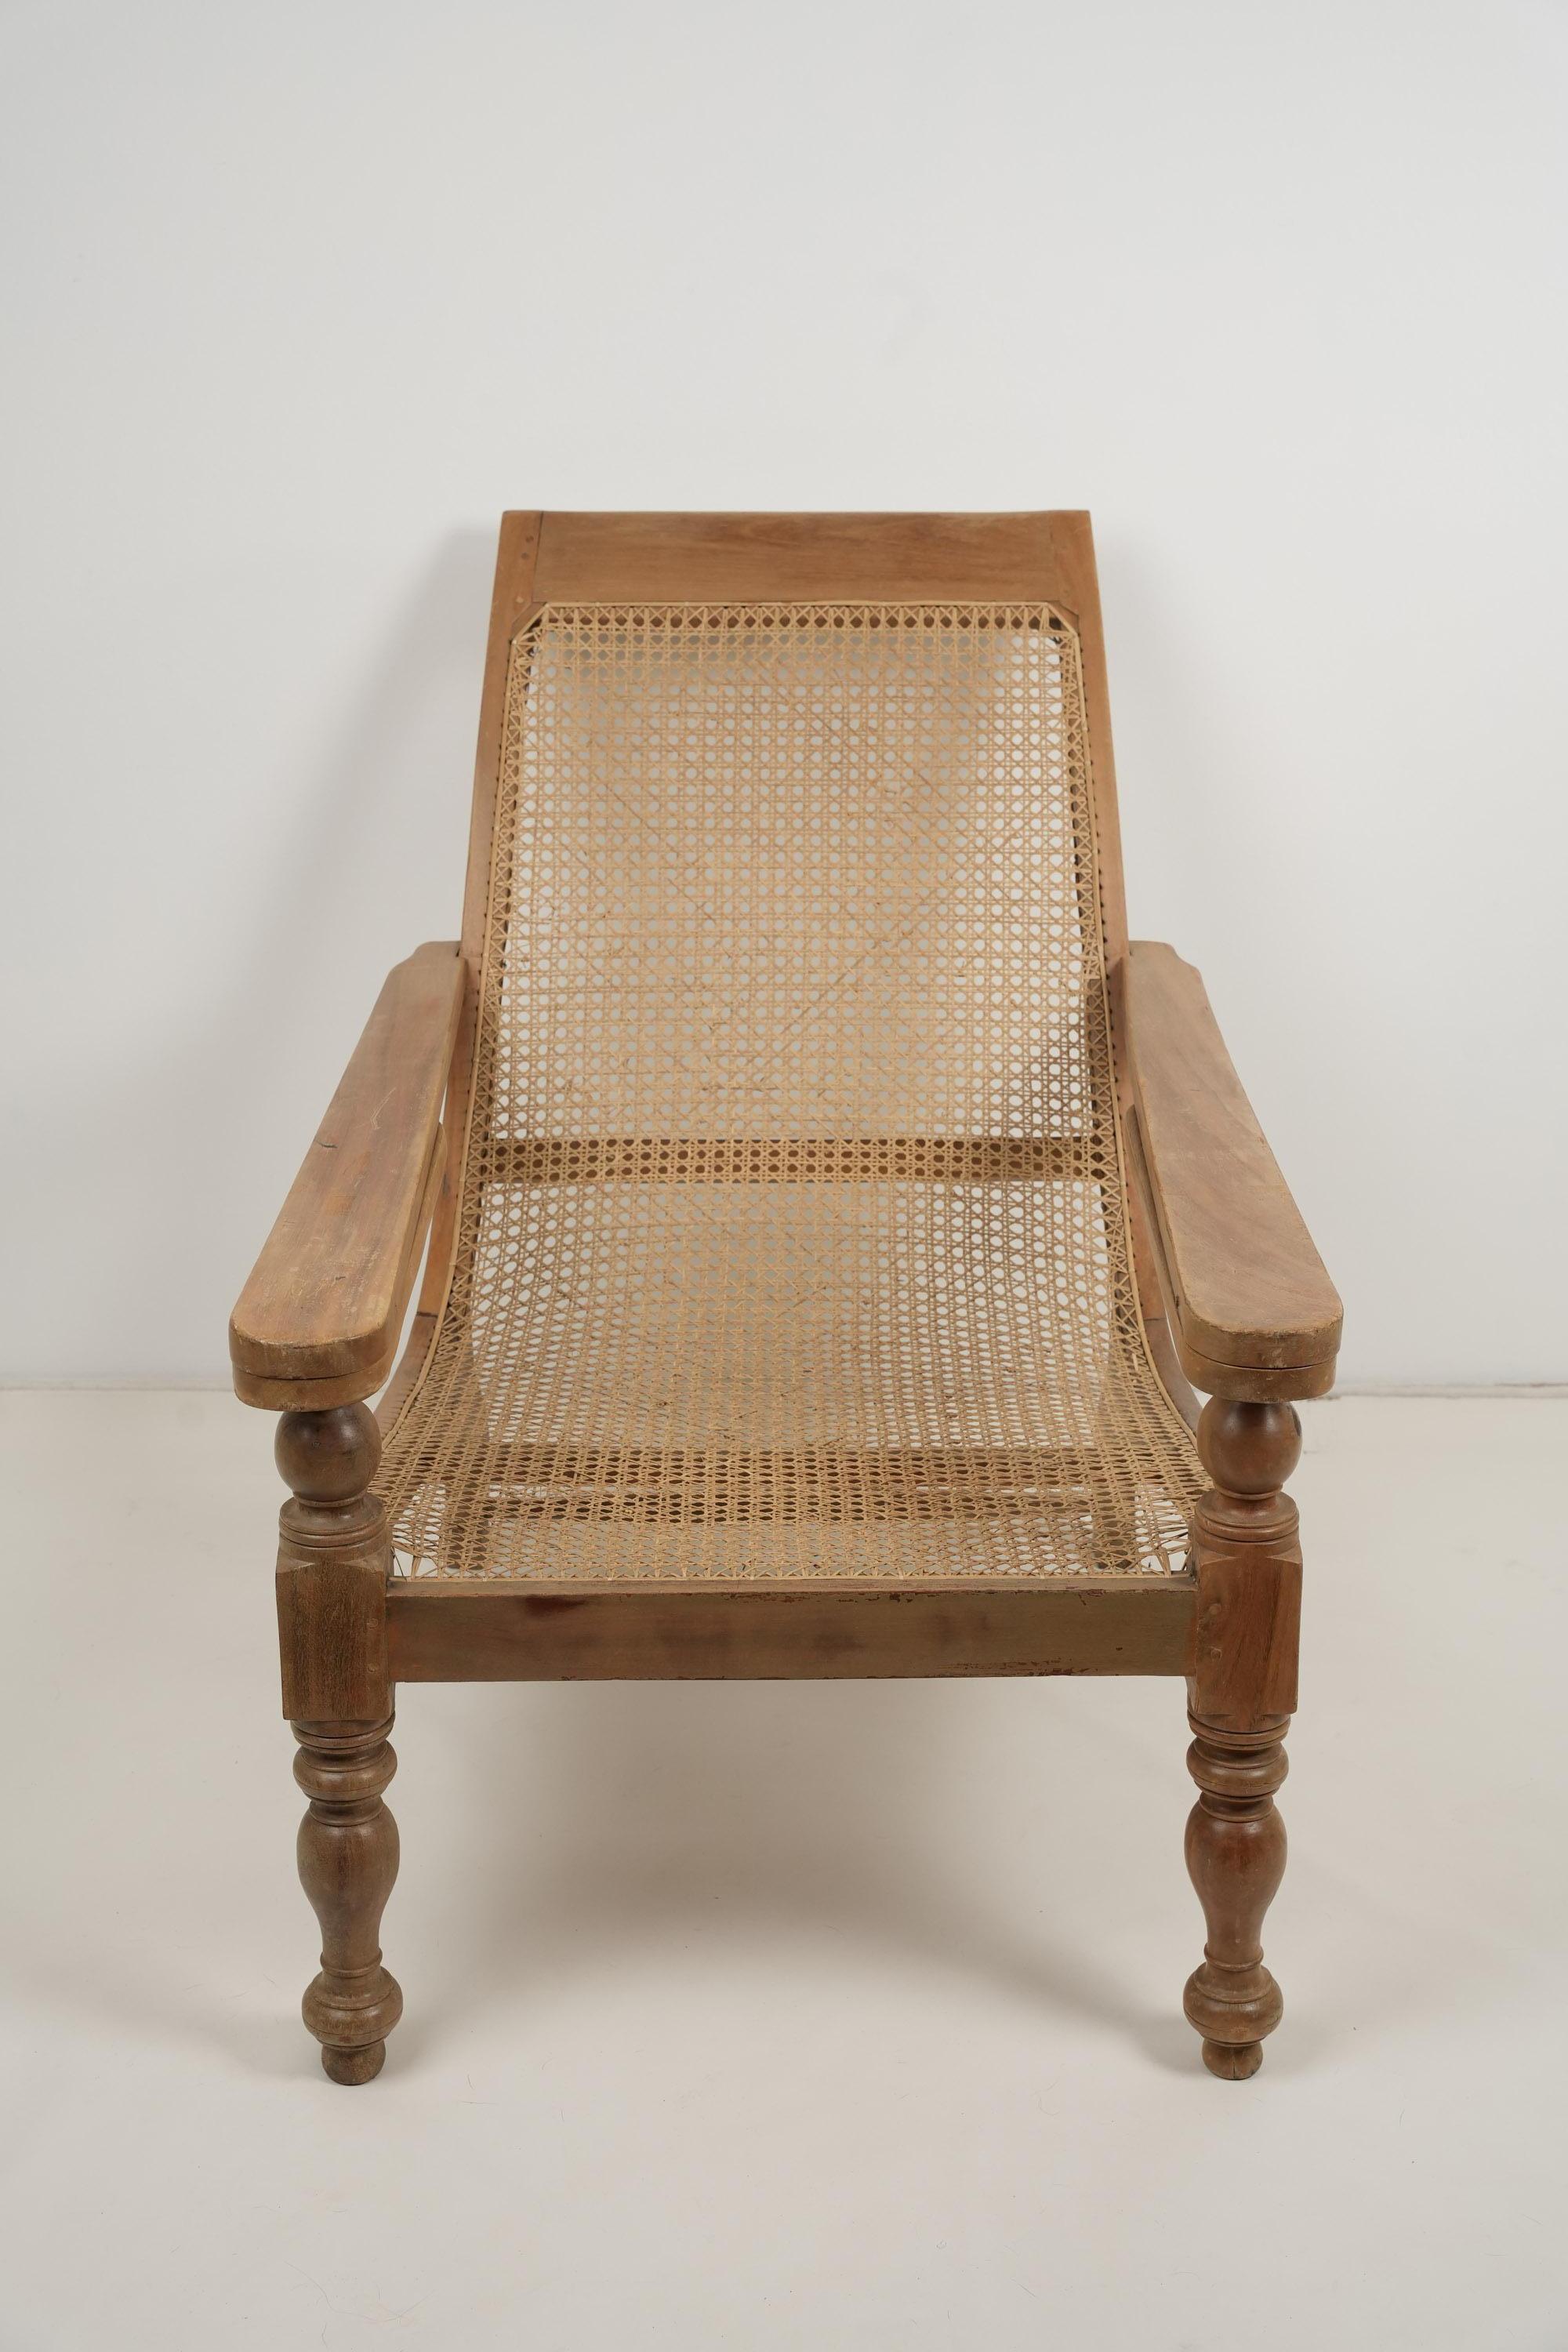 19th Century Anglo Indian Inlaid Plantation Chair with Extending Arms For Sale 6